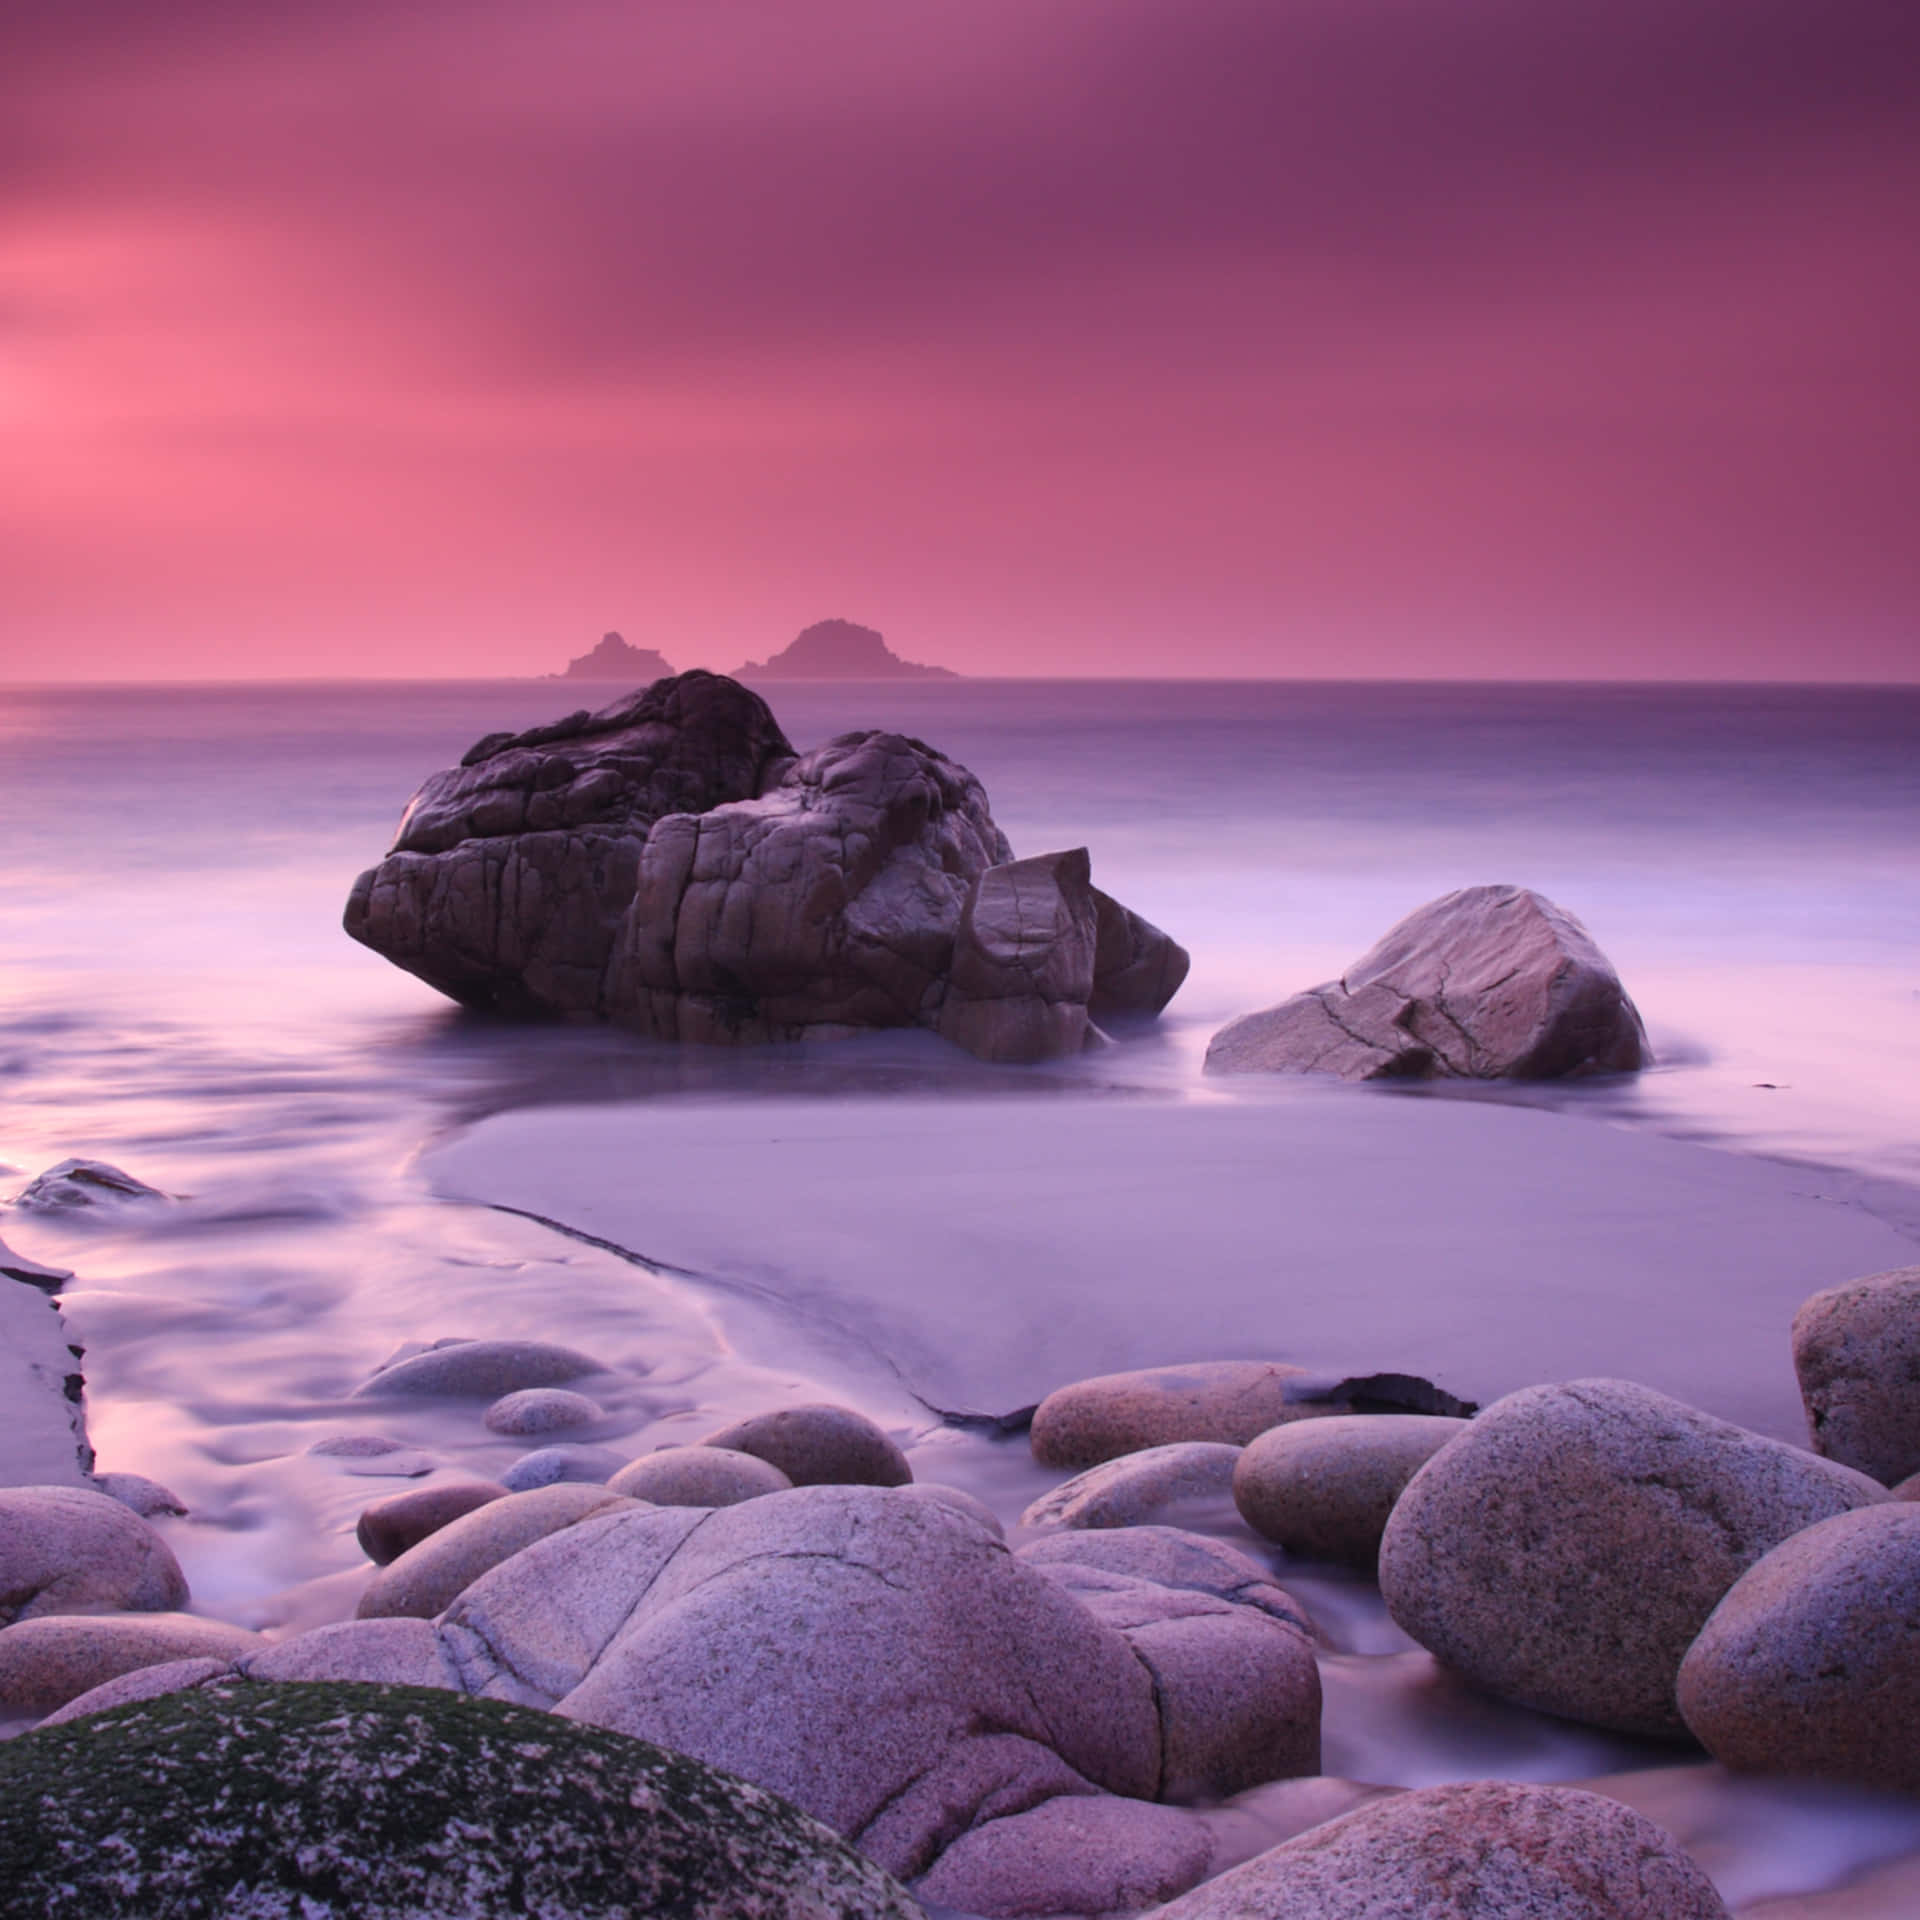 Download Pink Beach Sunset With Rocks Wallpaper